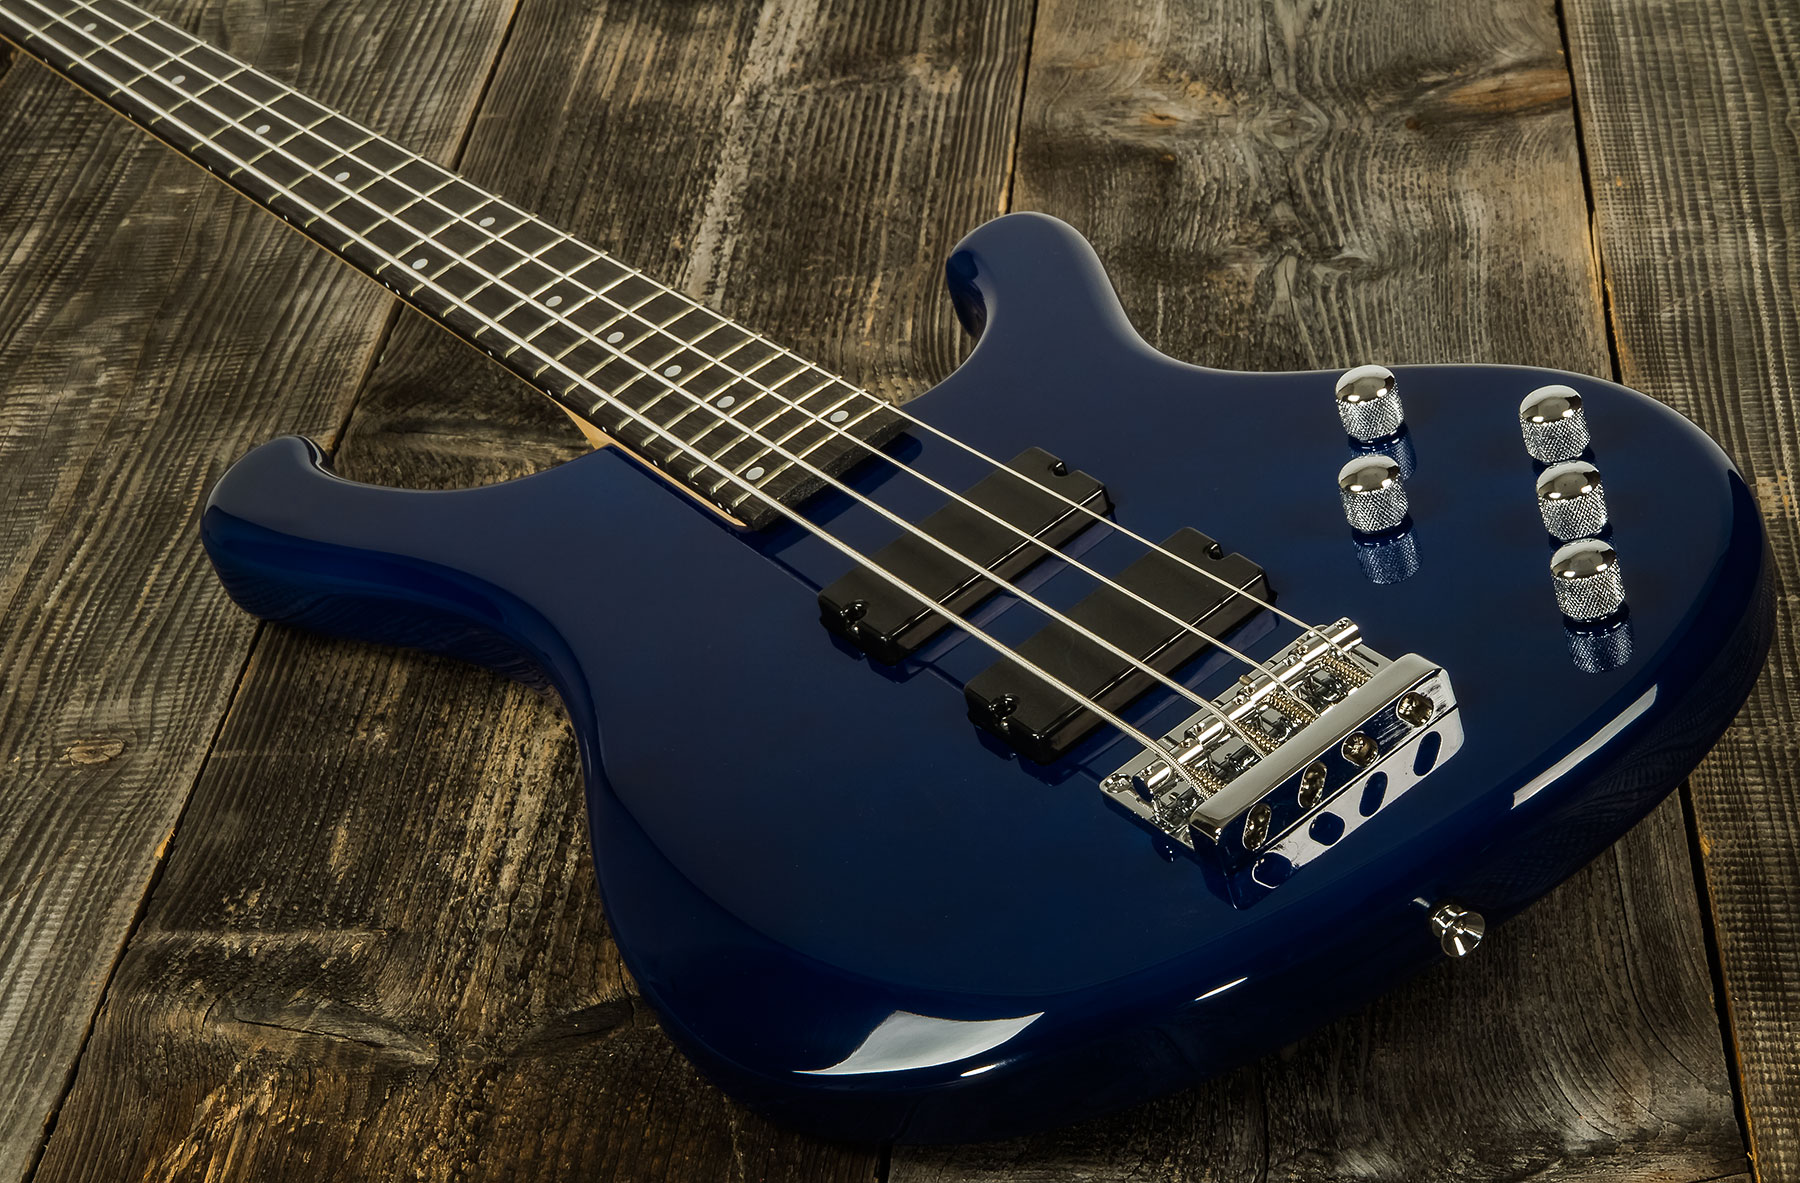 Eastone Rb Active Ama - Blue - Solid body electric bass - Variation 2